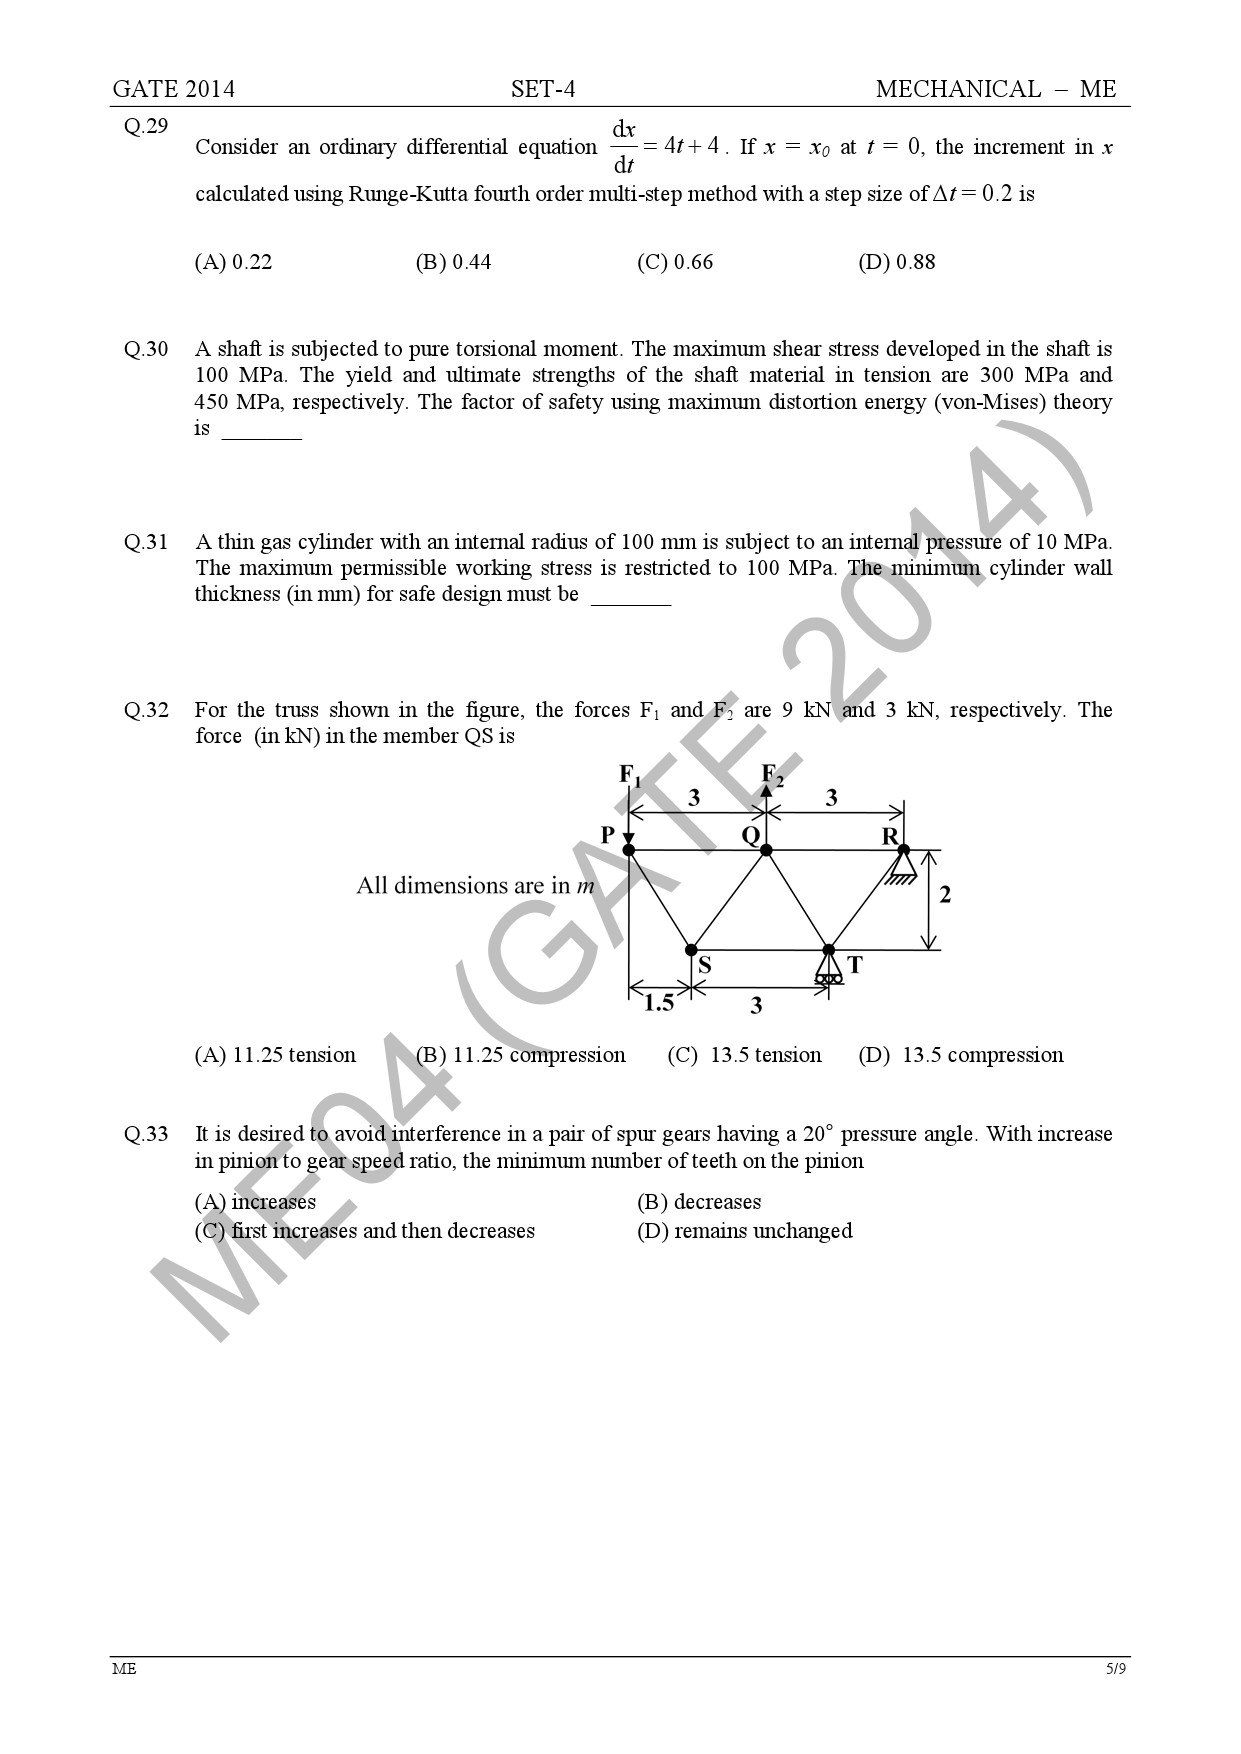 GATE Exam Question Paper 2014 Mechanical Engineering Set 4 11